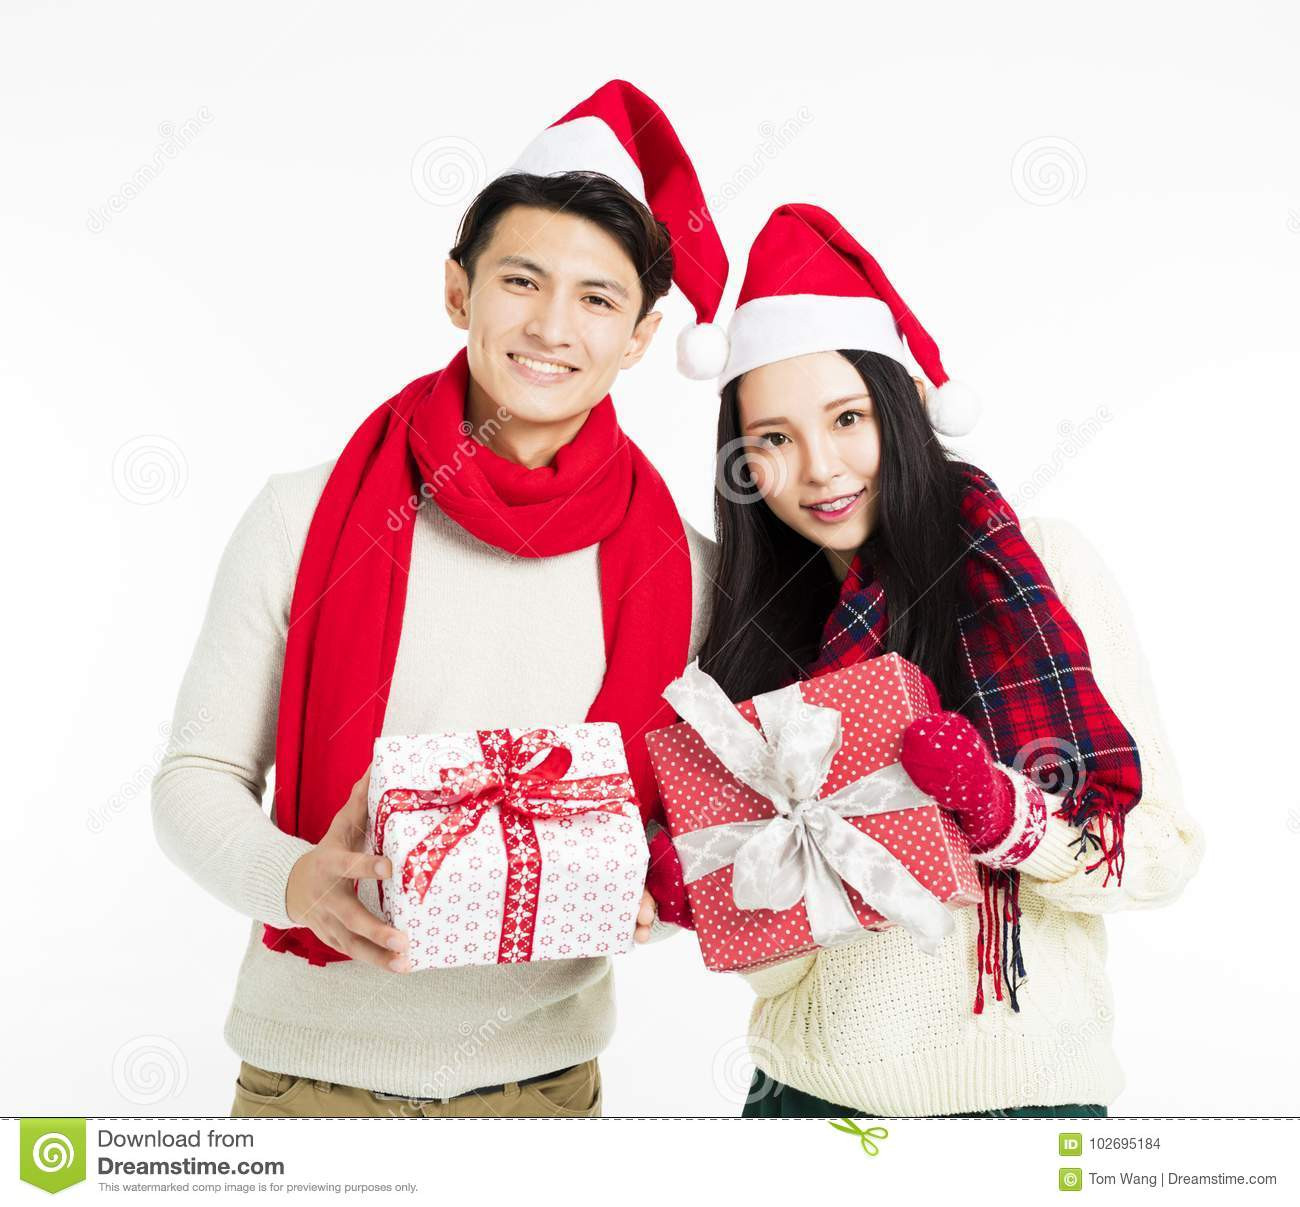 Christmas Gift Ideas Young Couple
 Young Couple Showing Christmas Gifts Stock Image